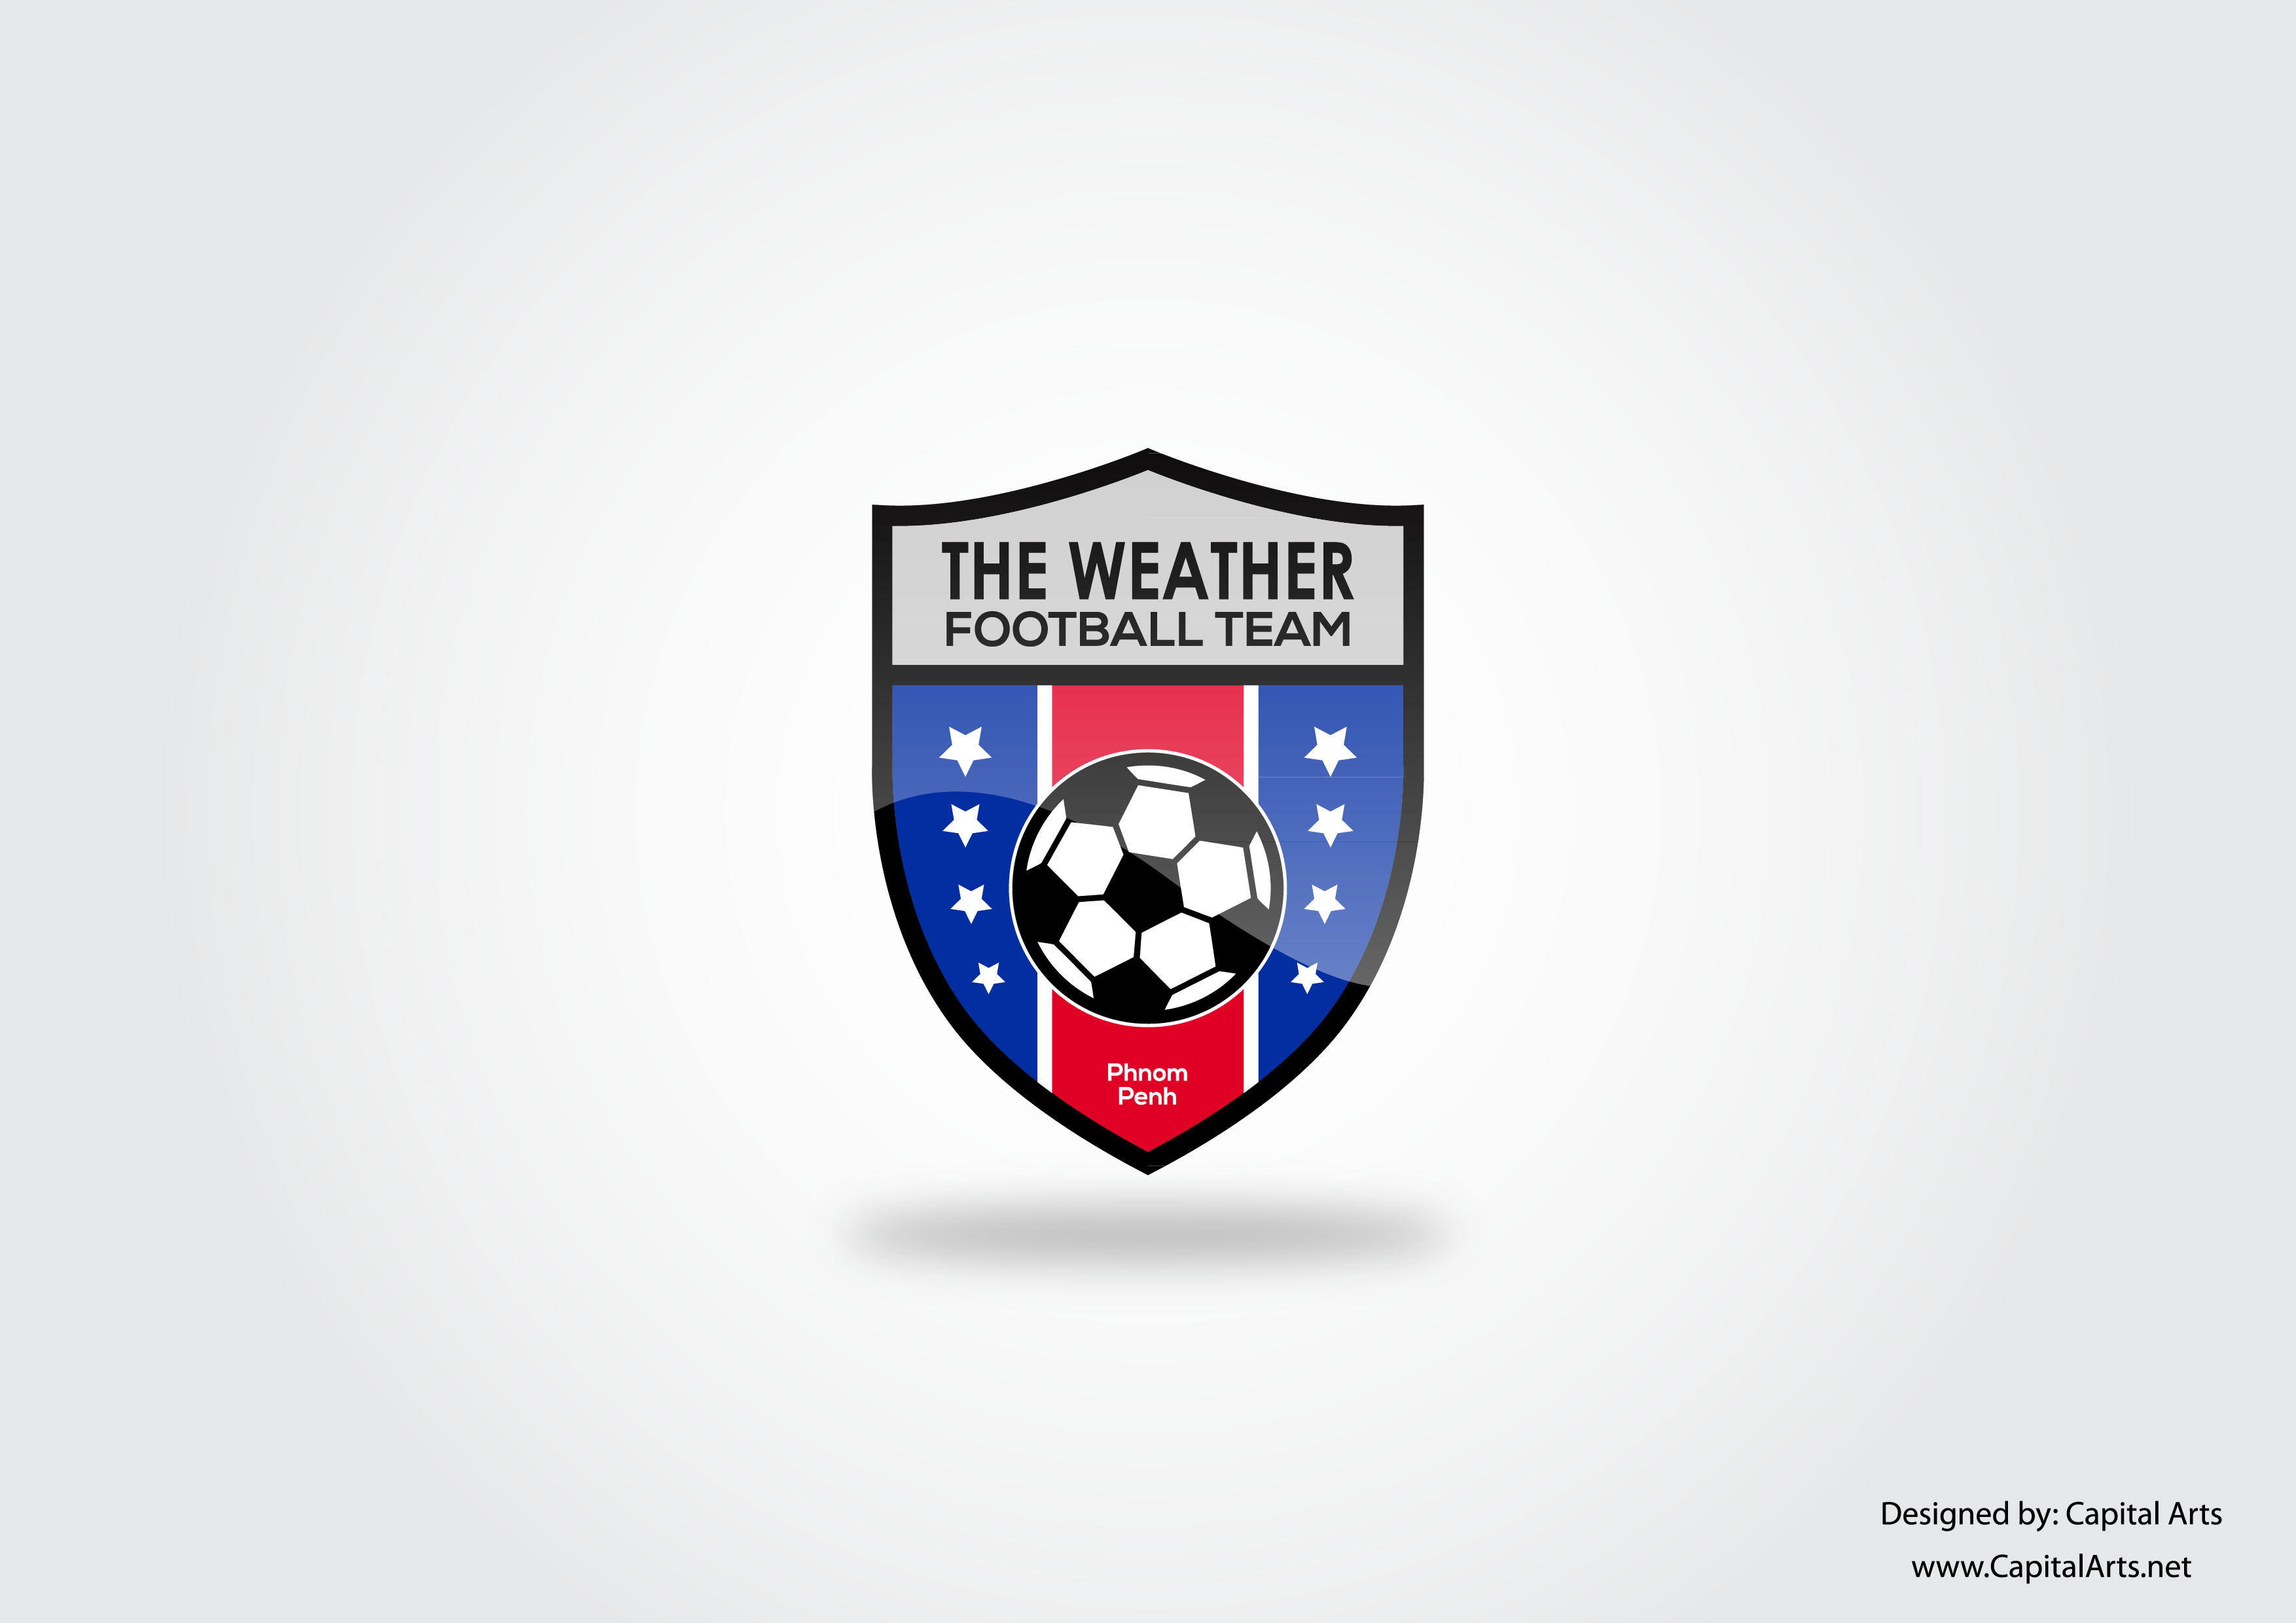 The Weather Football